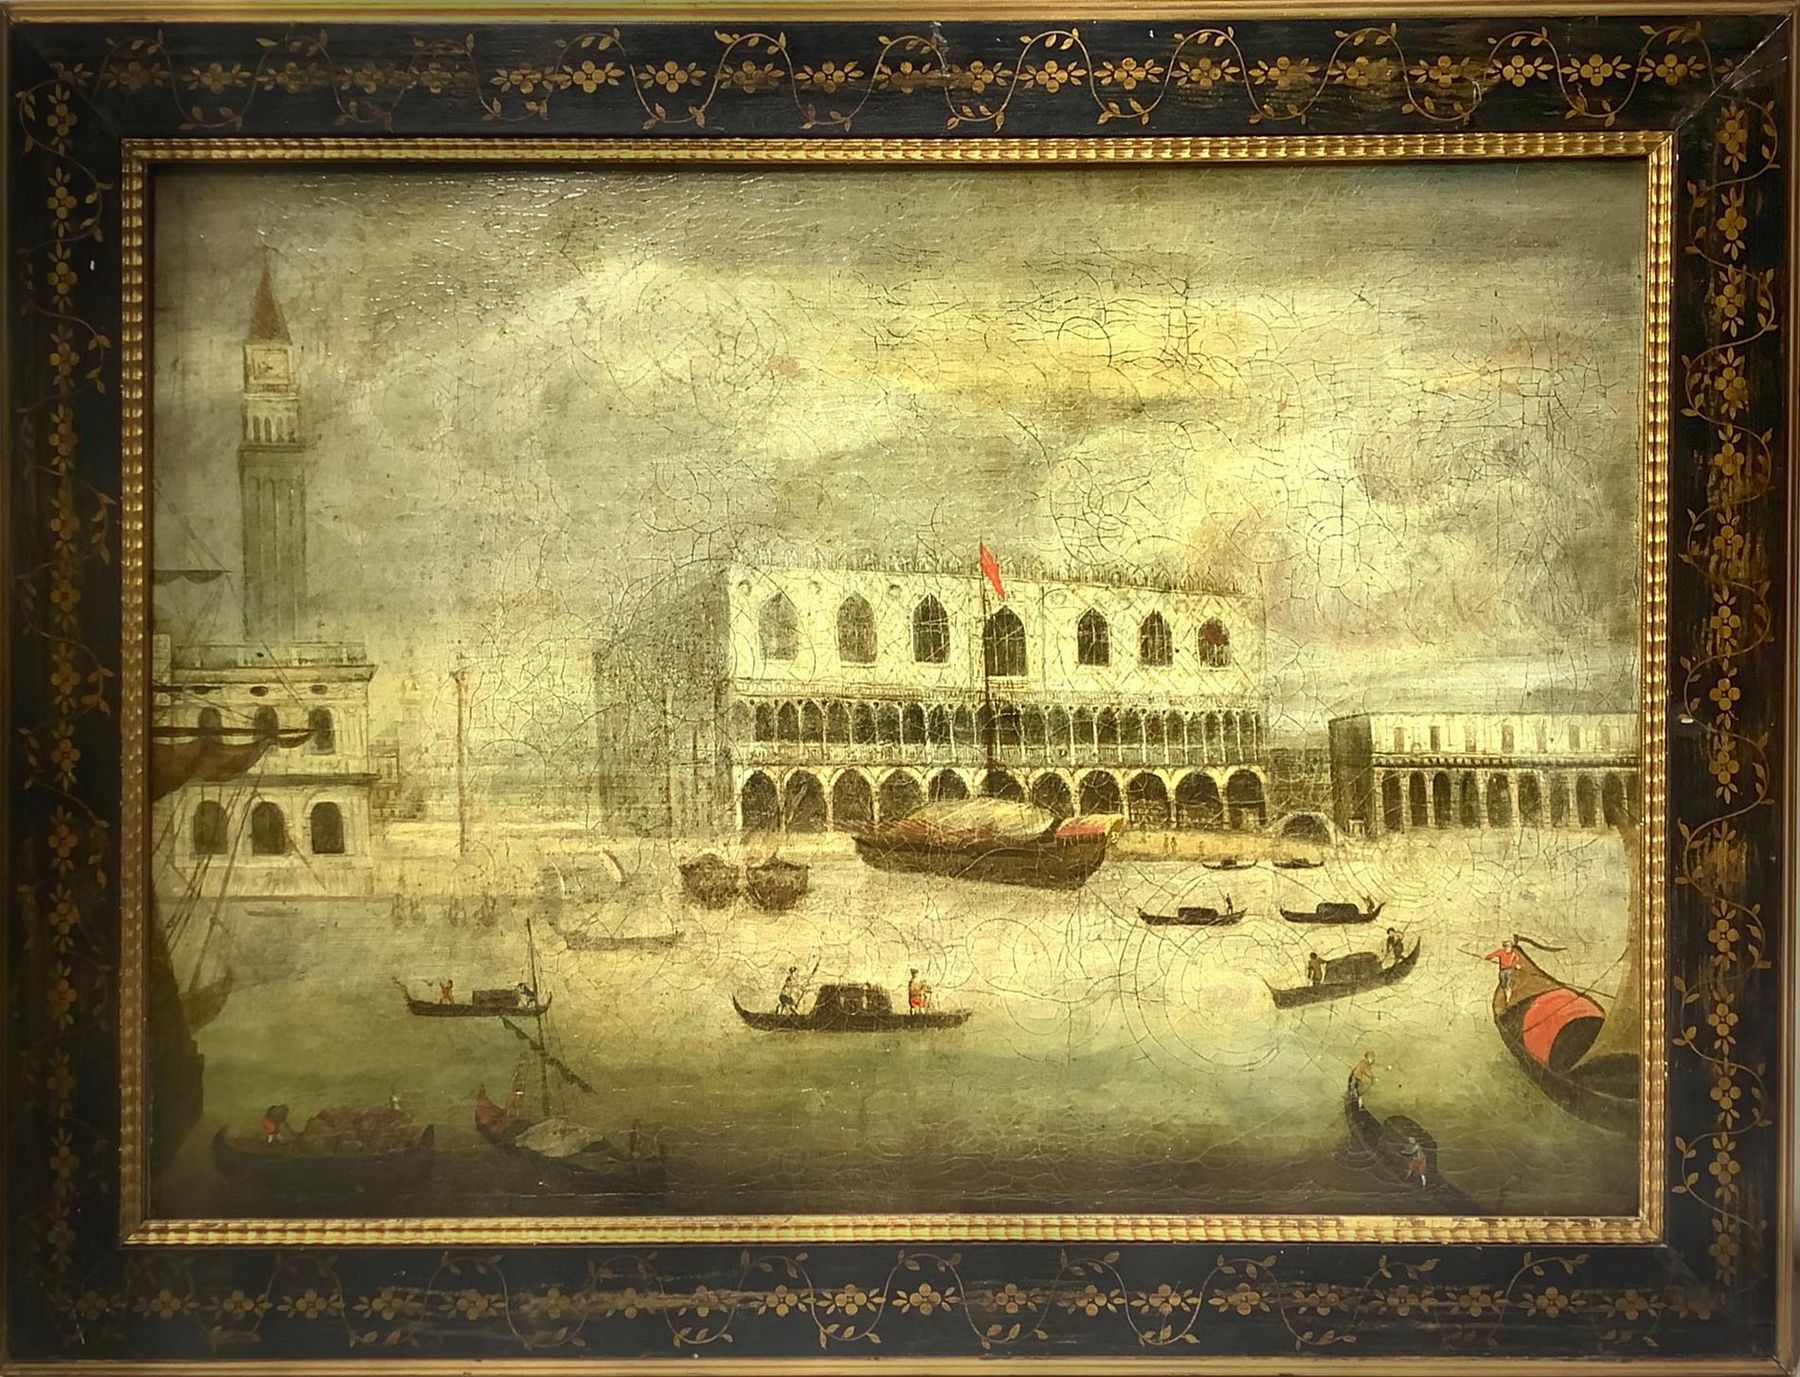 Oil painting on canvas depicting the Doge's Palace in Venice, seventeenth / eighteenth century Venet